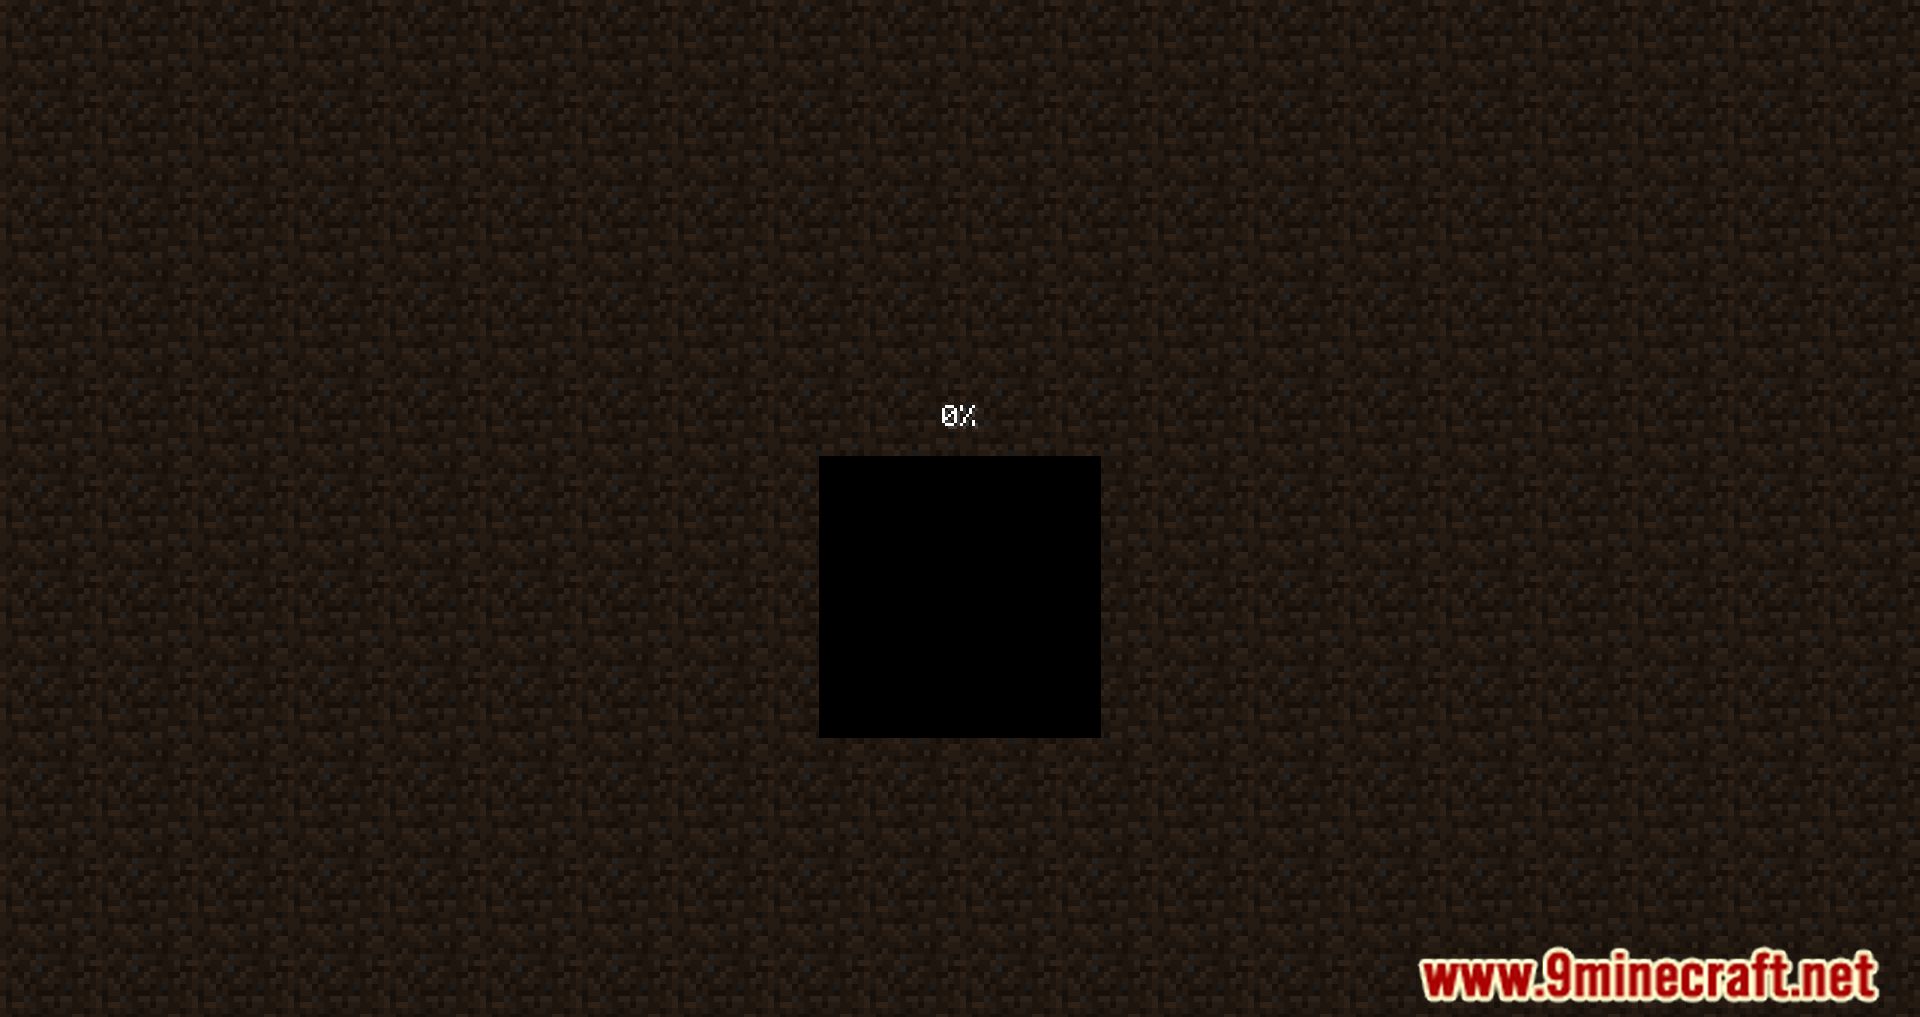 Shedaniel's Better Loading Screen Mod (1.18.2, 1.16.5) - Imitates The Old Forge 1.12.2 Style Loading Screen 3